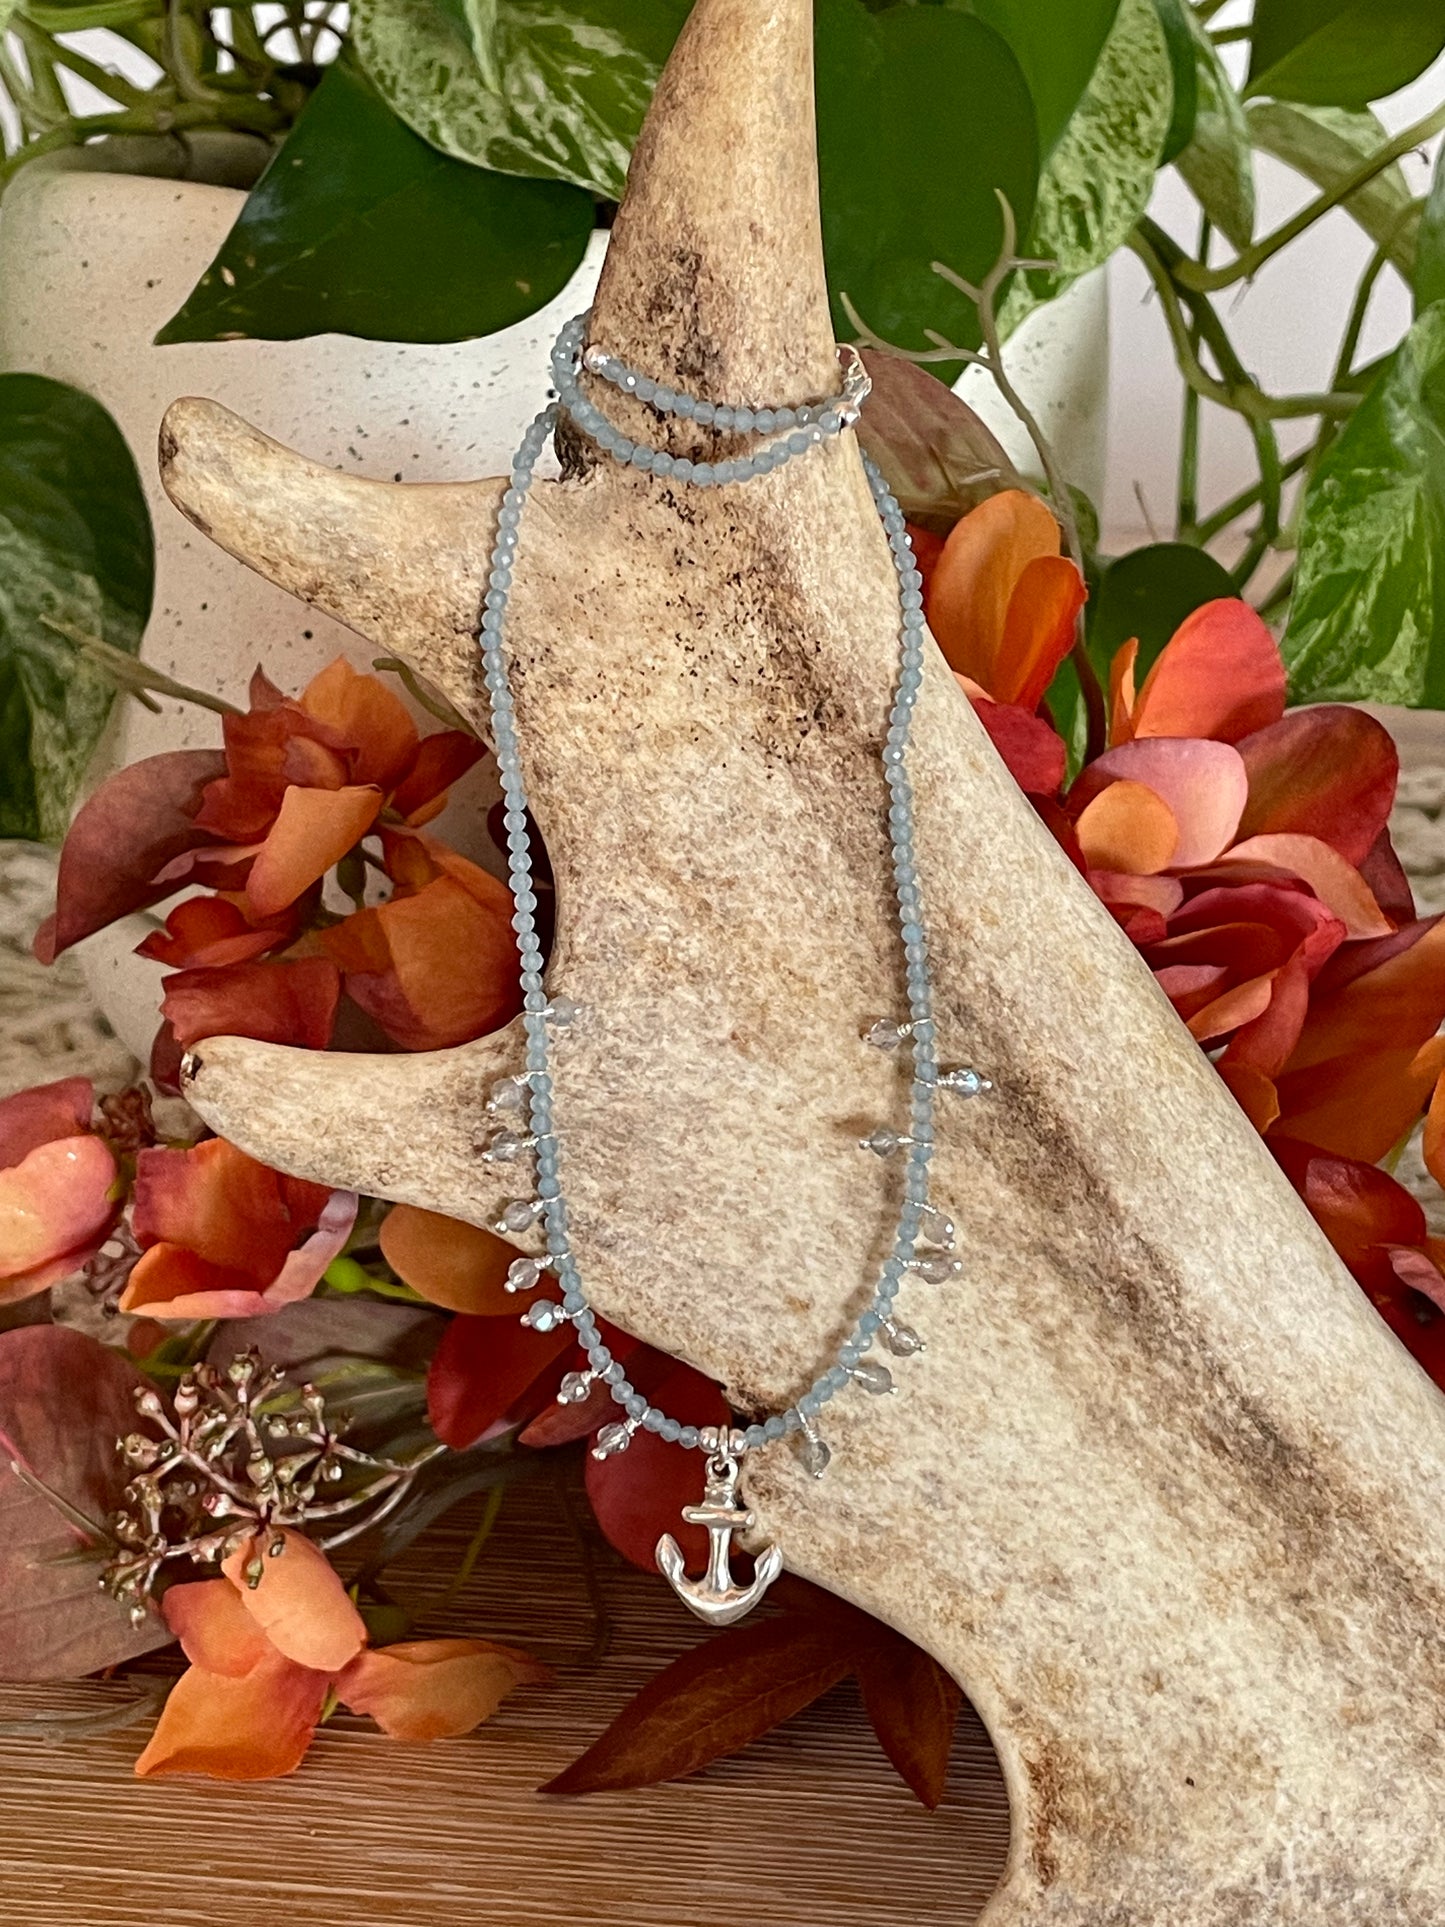 Blue Chalcedony Siren ~ Silver Necklace